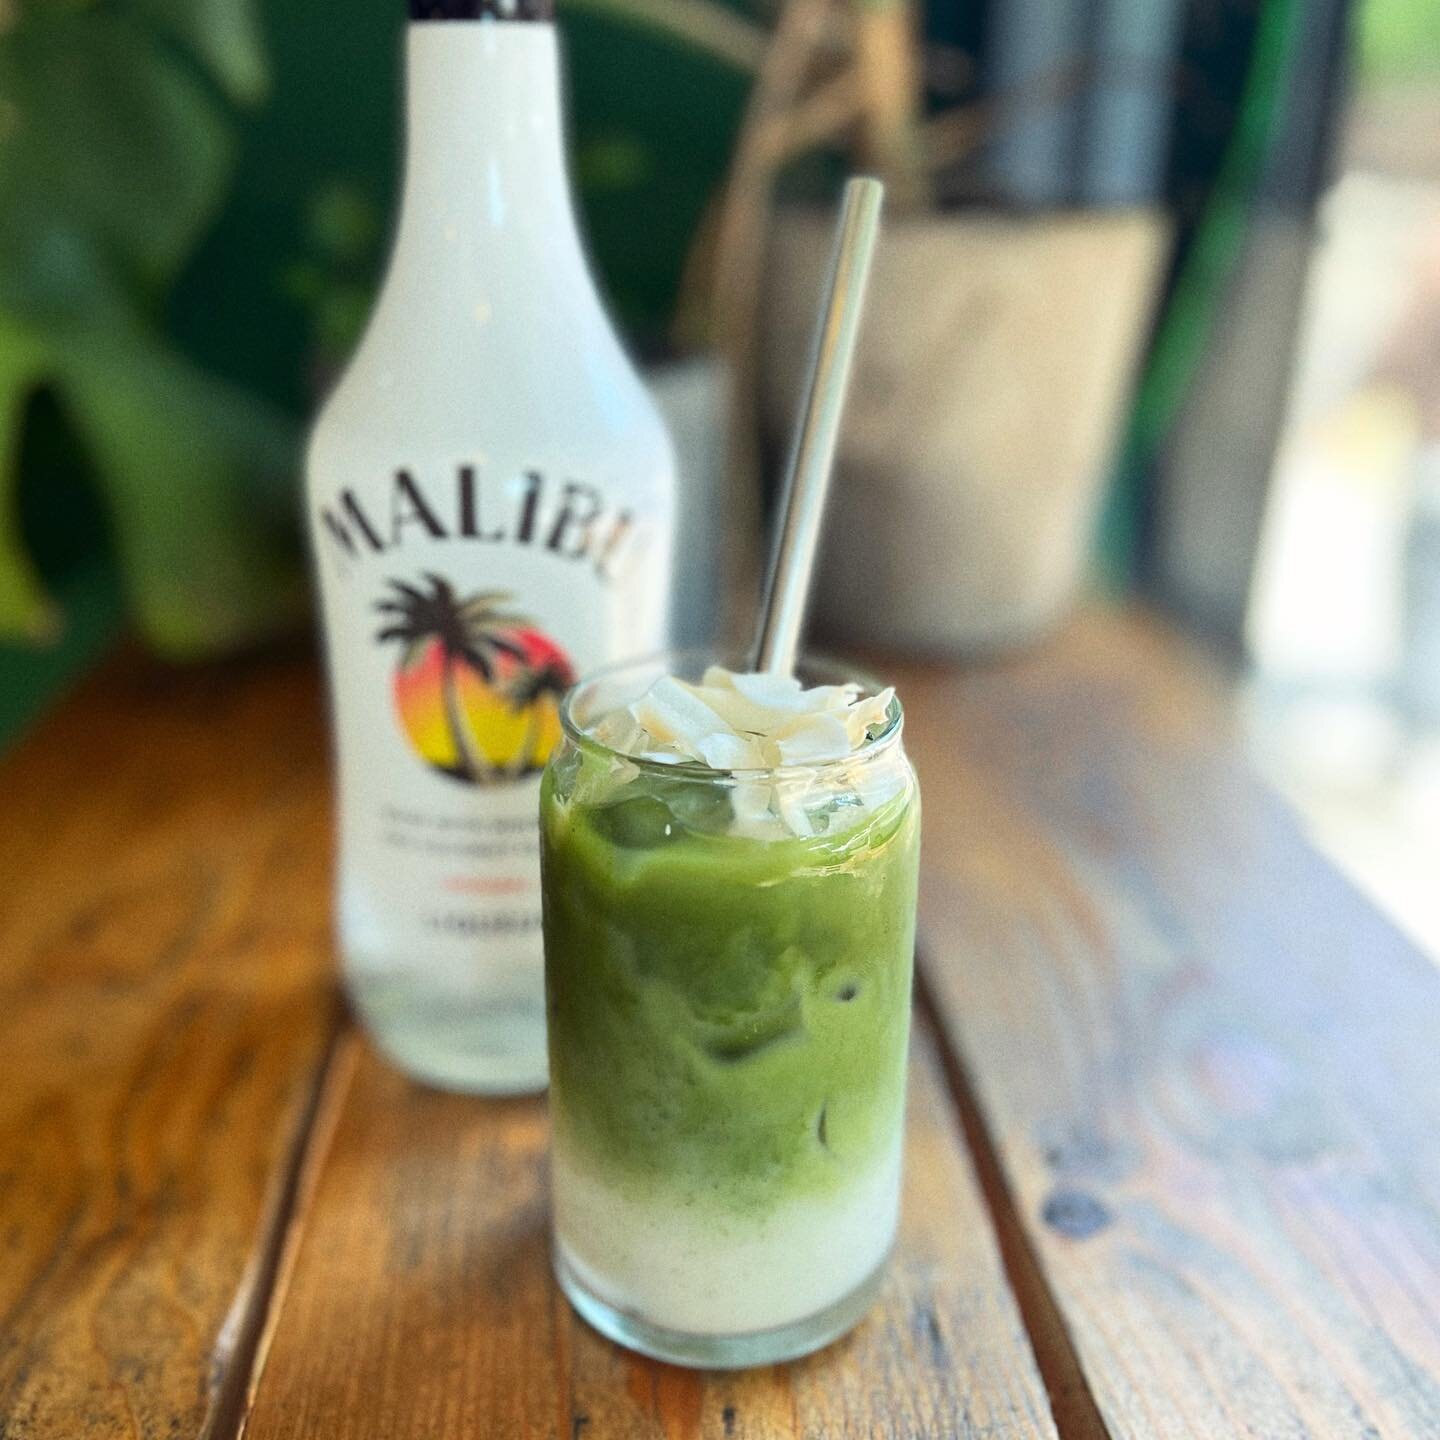 NEW COCKTAIL 🌴🍵🥥 Malibu Green Matcha, who is up to try this delicious combo of coconut milk, malibu, matcha and vanilla syrup? Available from tomorrow at Sazzy and Fran🥰 
#matcha #greentea #tea #matchalatte #matchalover #coffee #matchagreentea #m